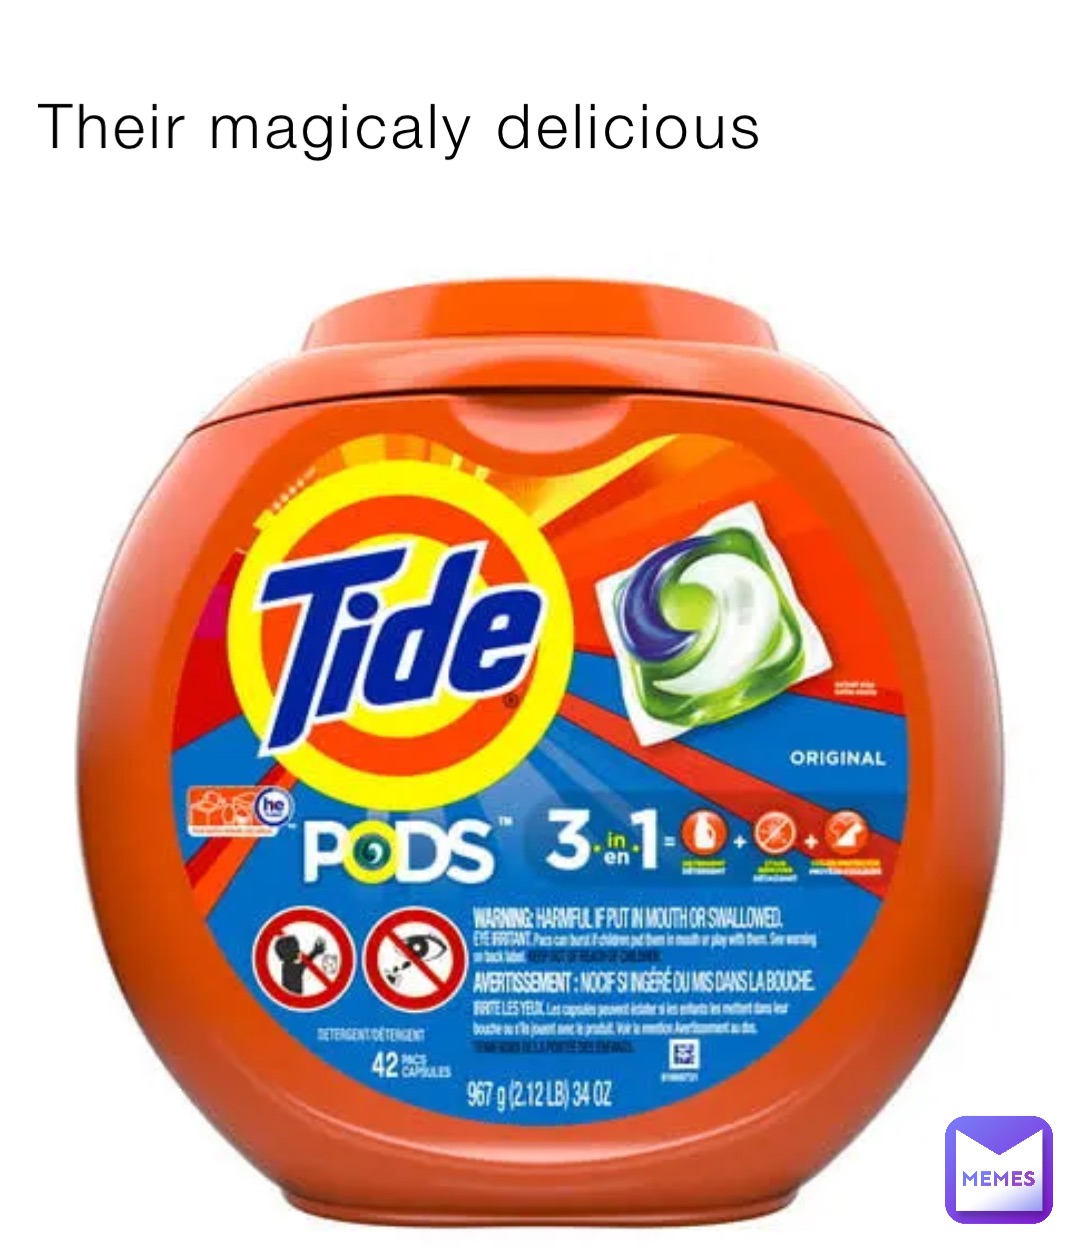 Their magicaly delicious